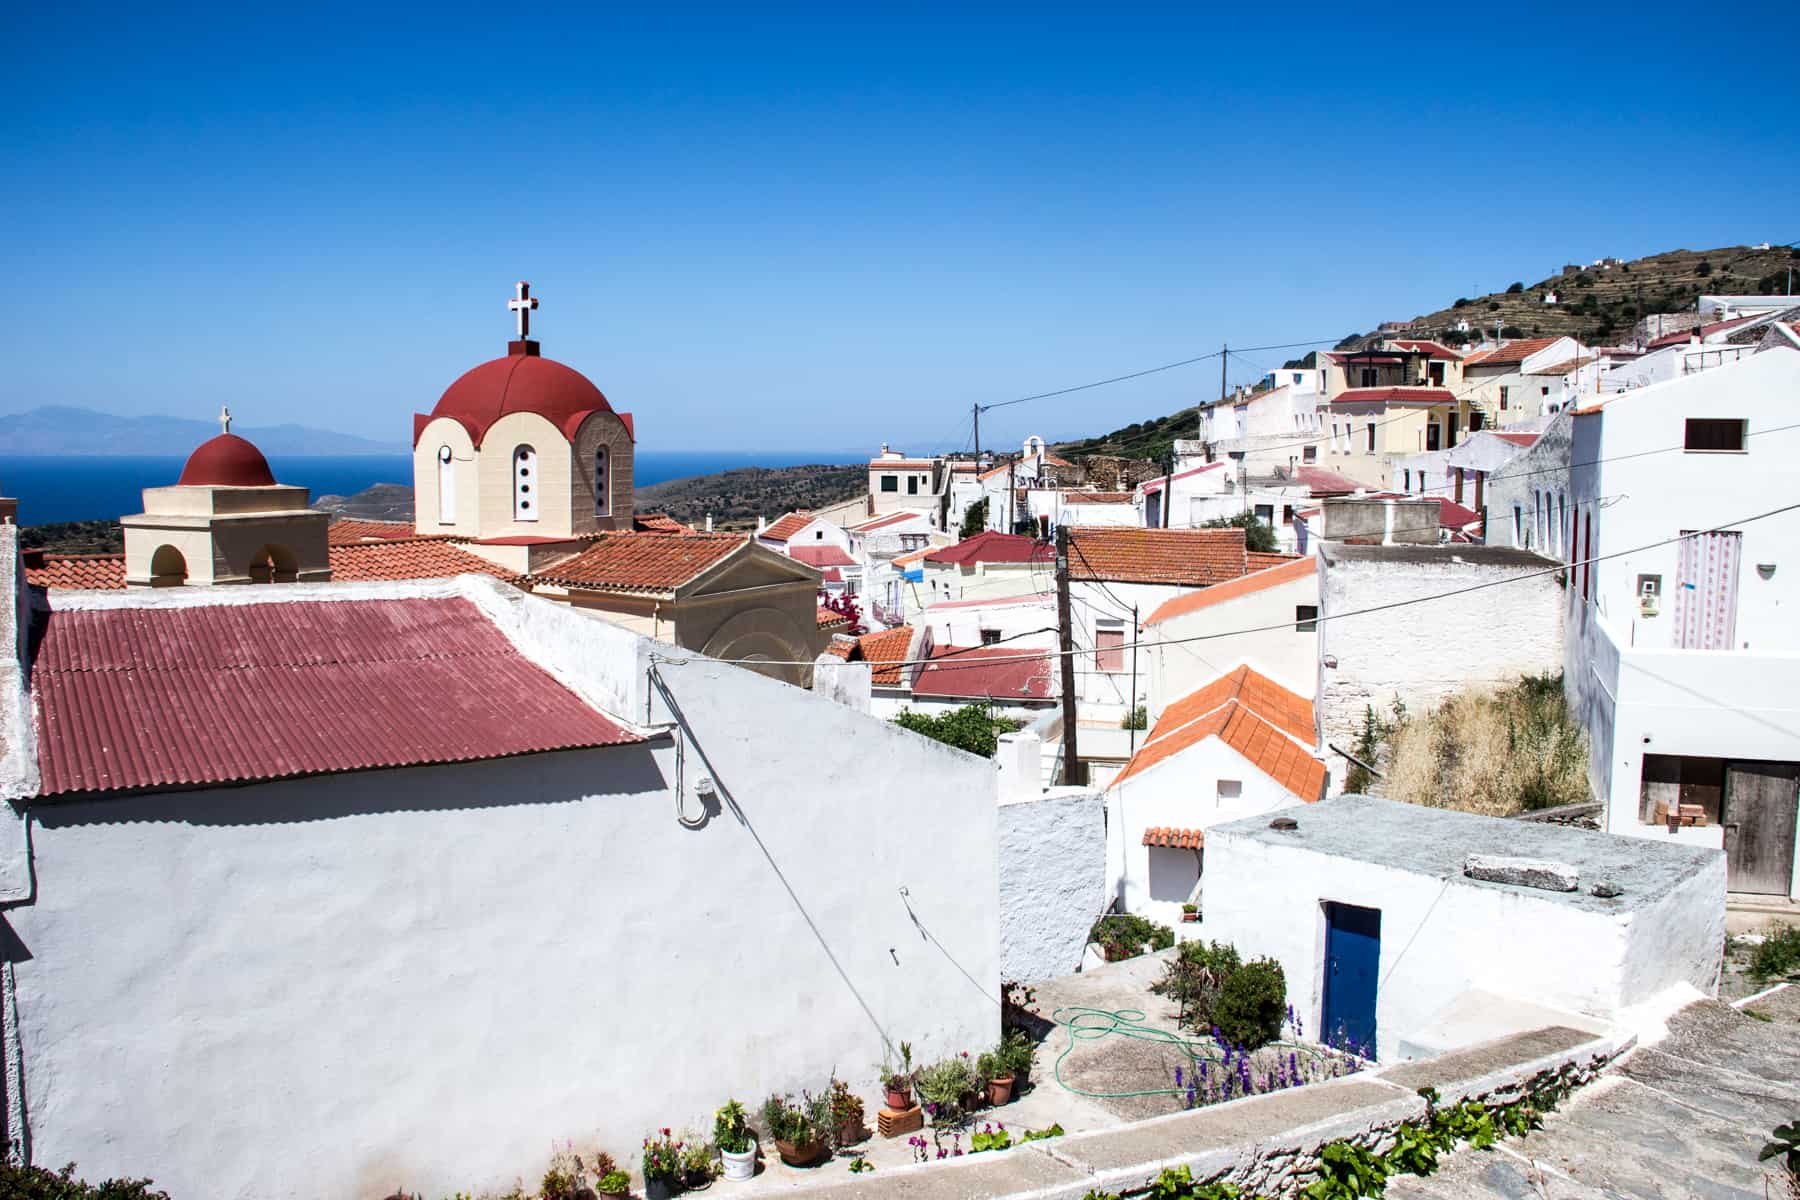 A blend of white houses with red rooftops, and a red spired church in the background - a far view of Ioulida town on Kea Island in Greece